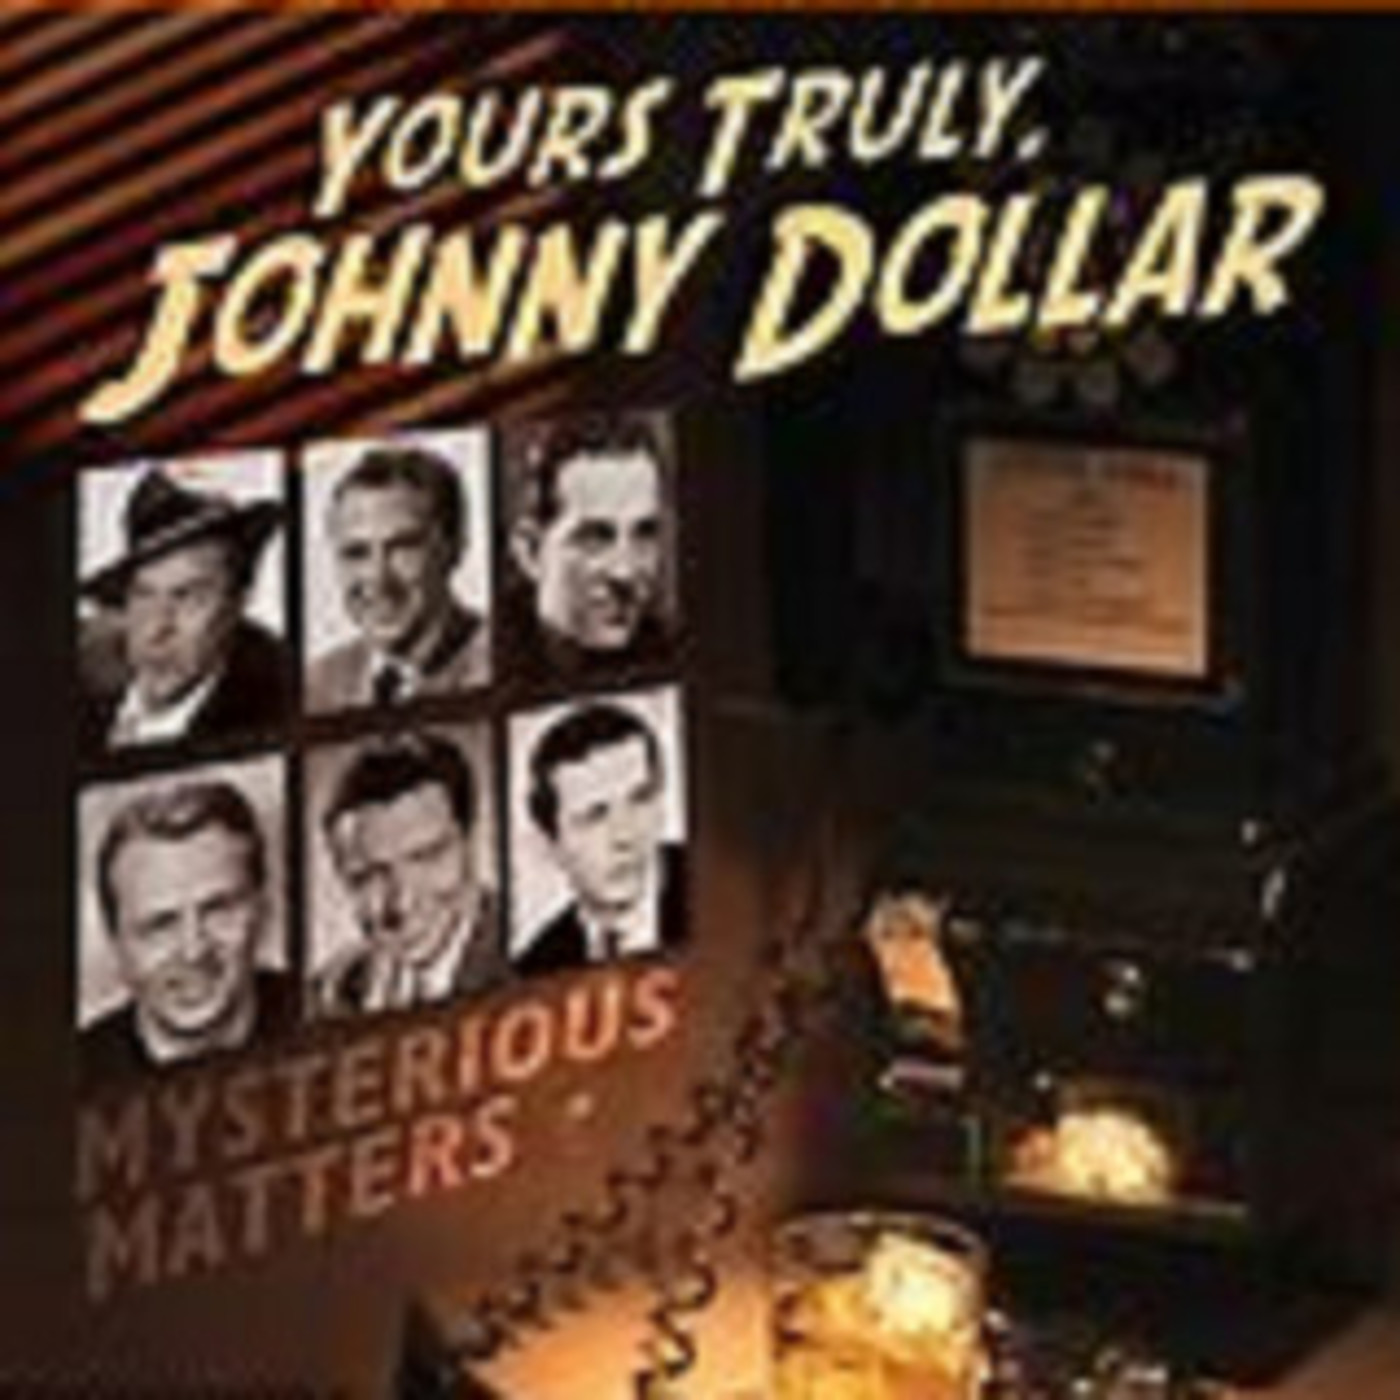 Yours Truly, Johnny Dollar - 072262, episode 801 - The Skimpy Matter